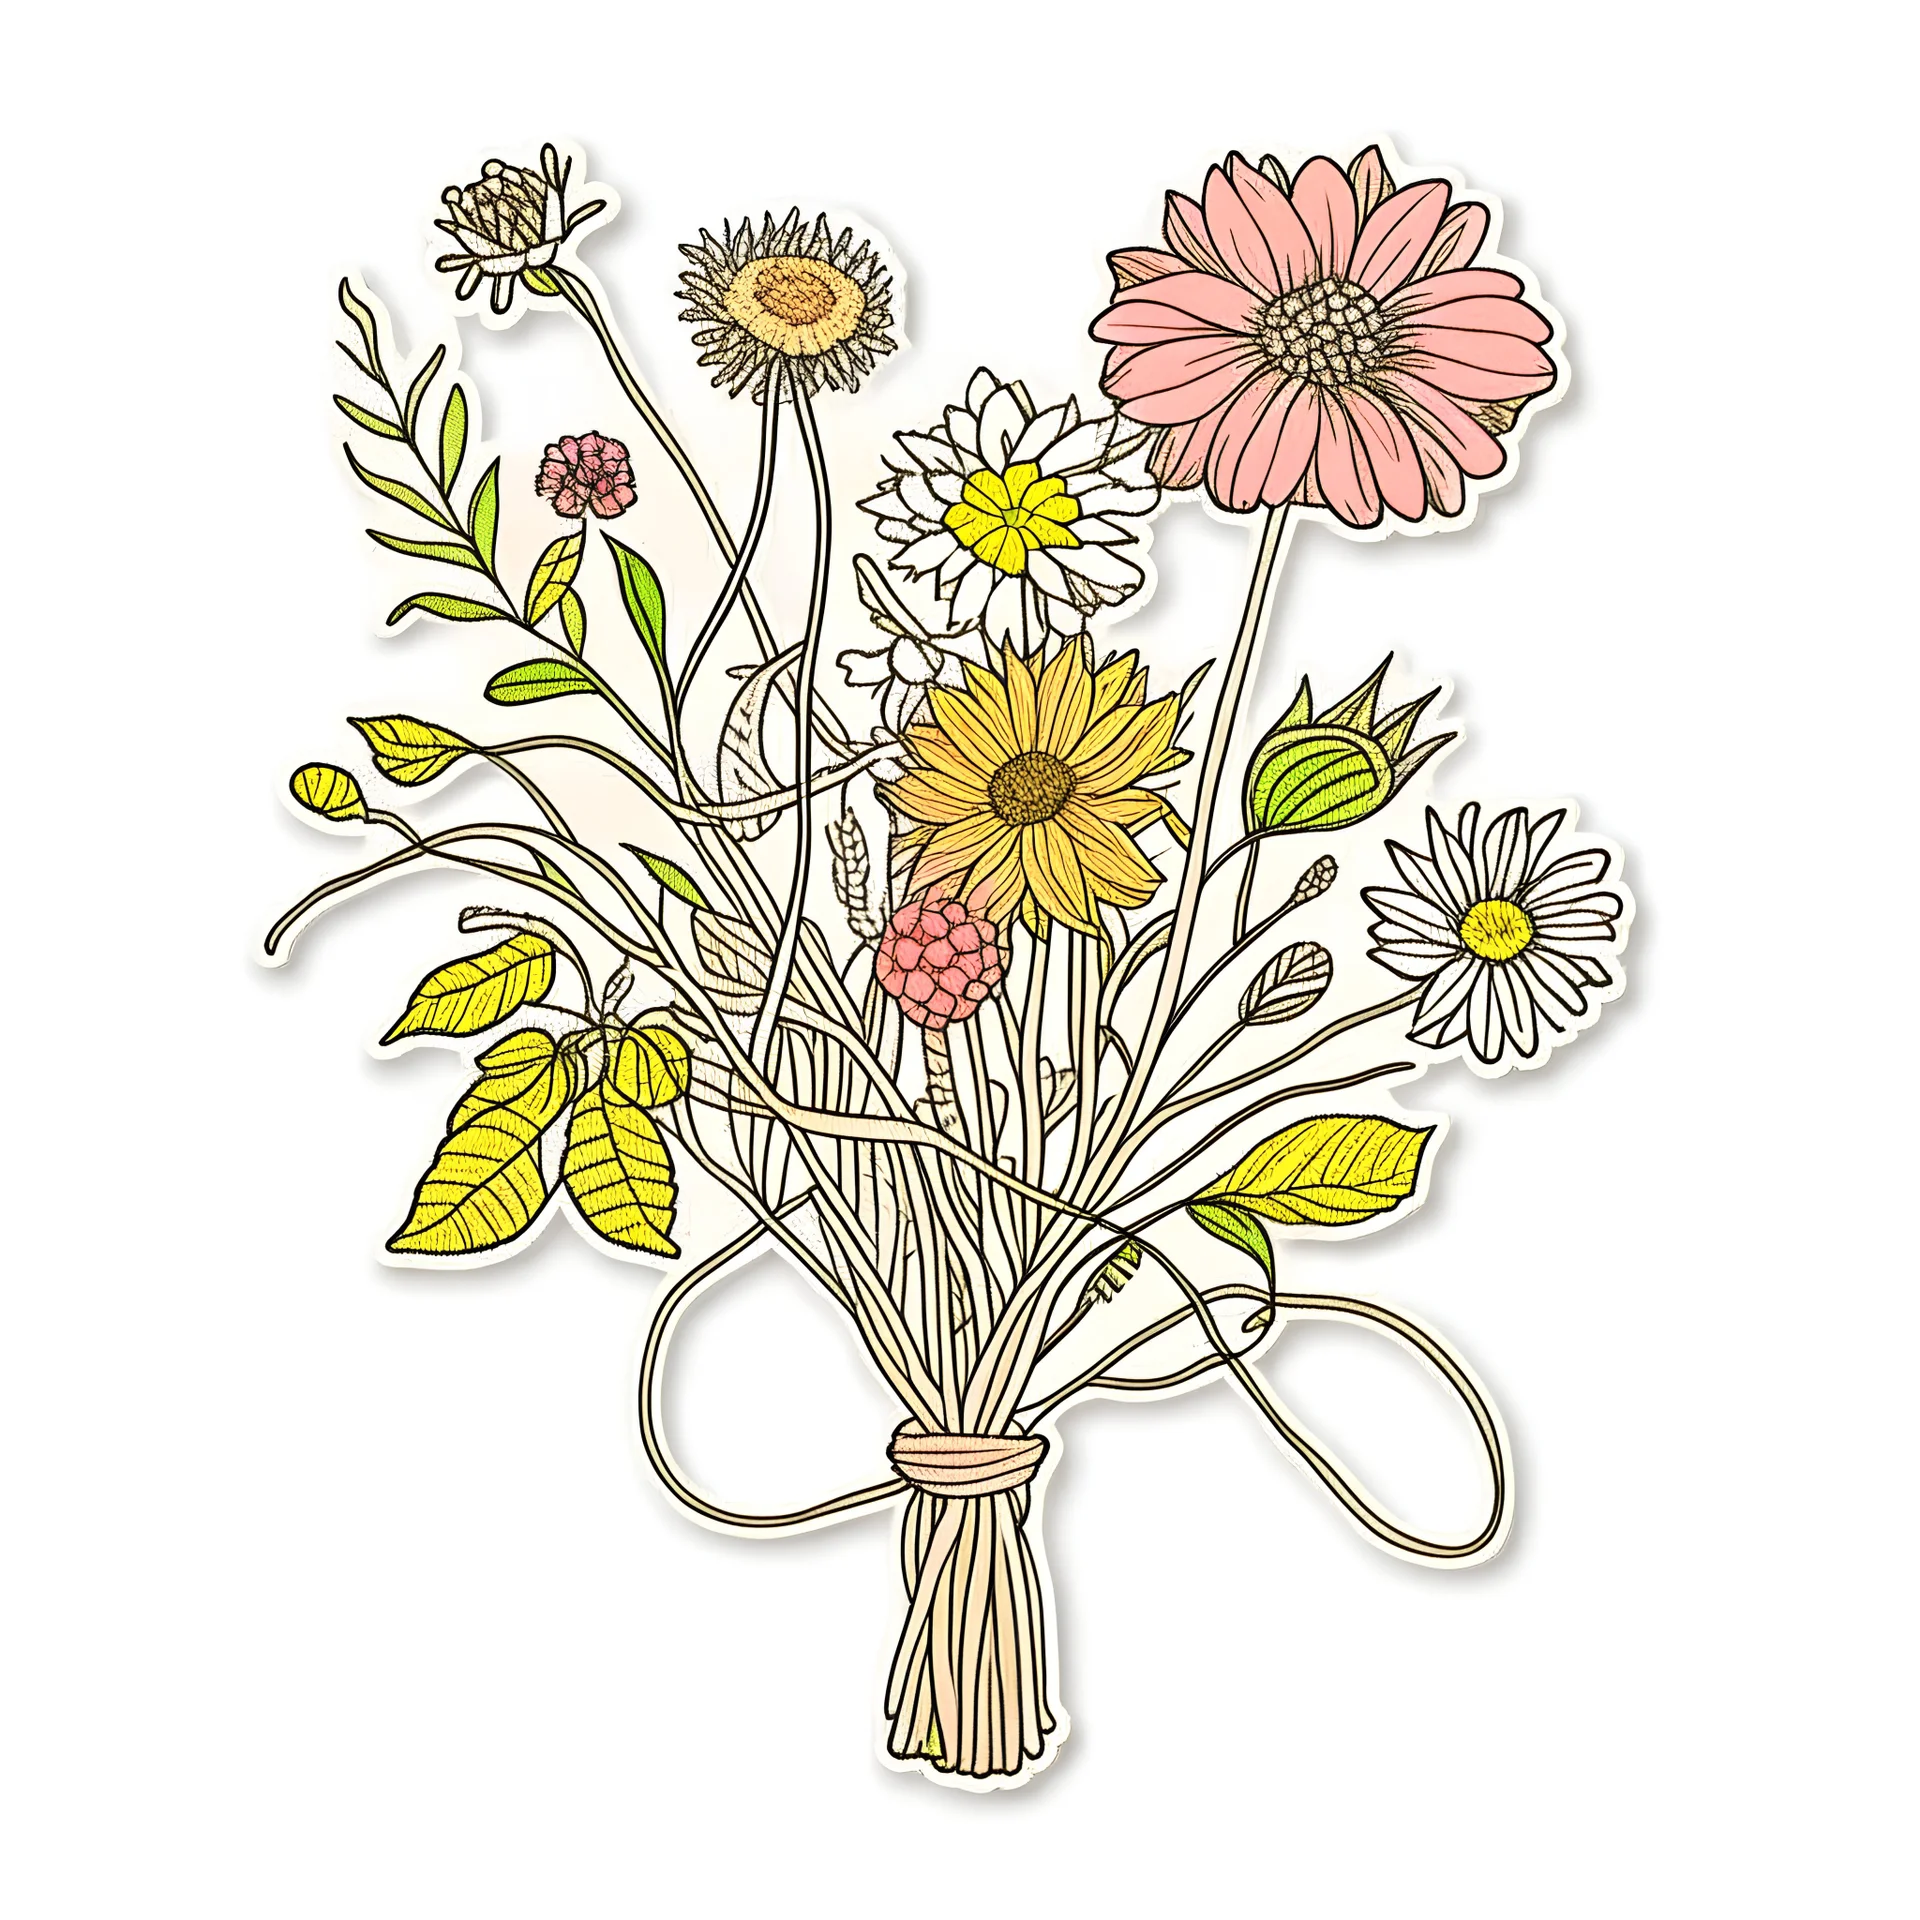 A bouquet of hand-drawn wildflowers in earthy tones, tied together with twine sticker on white background.